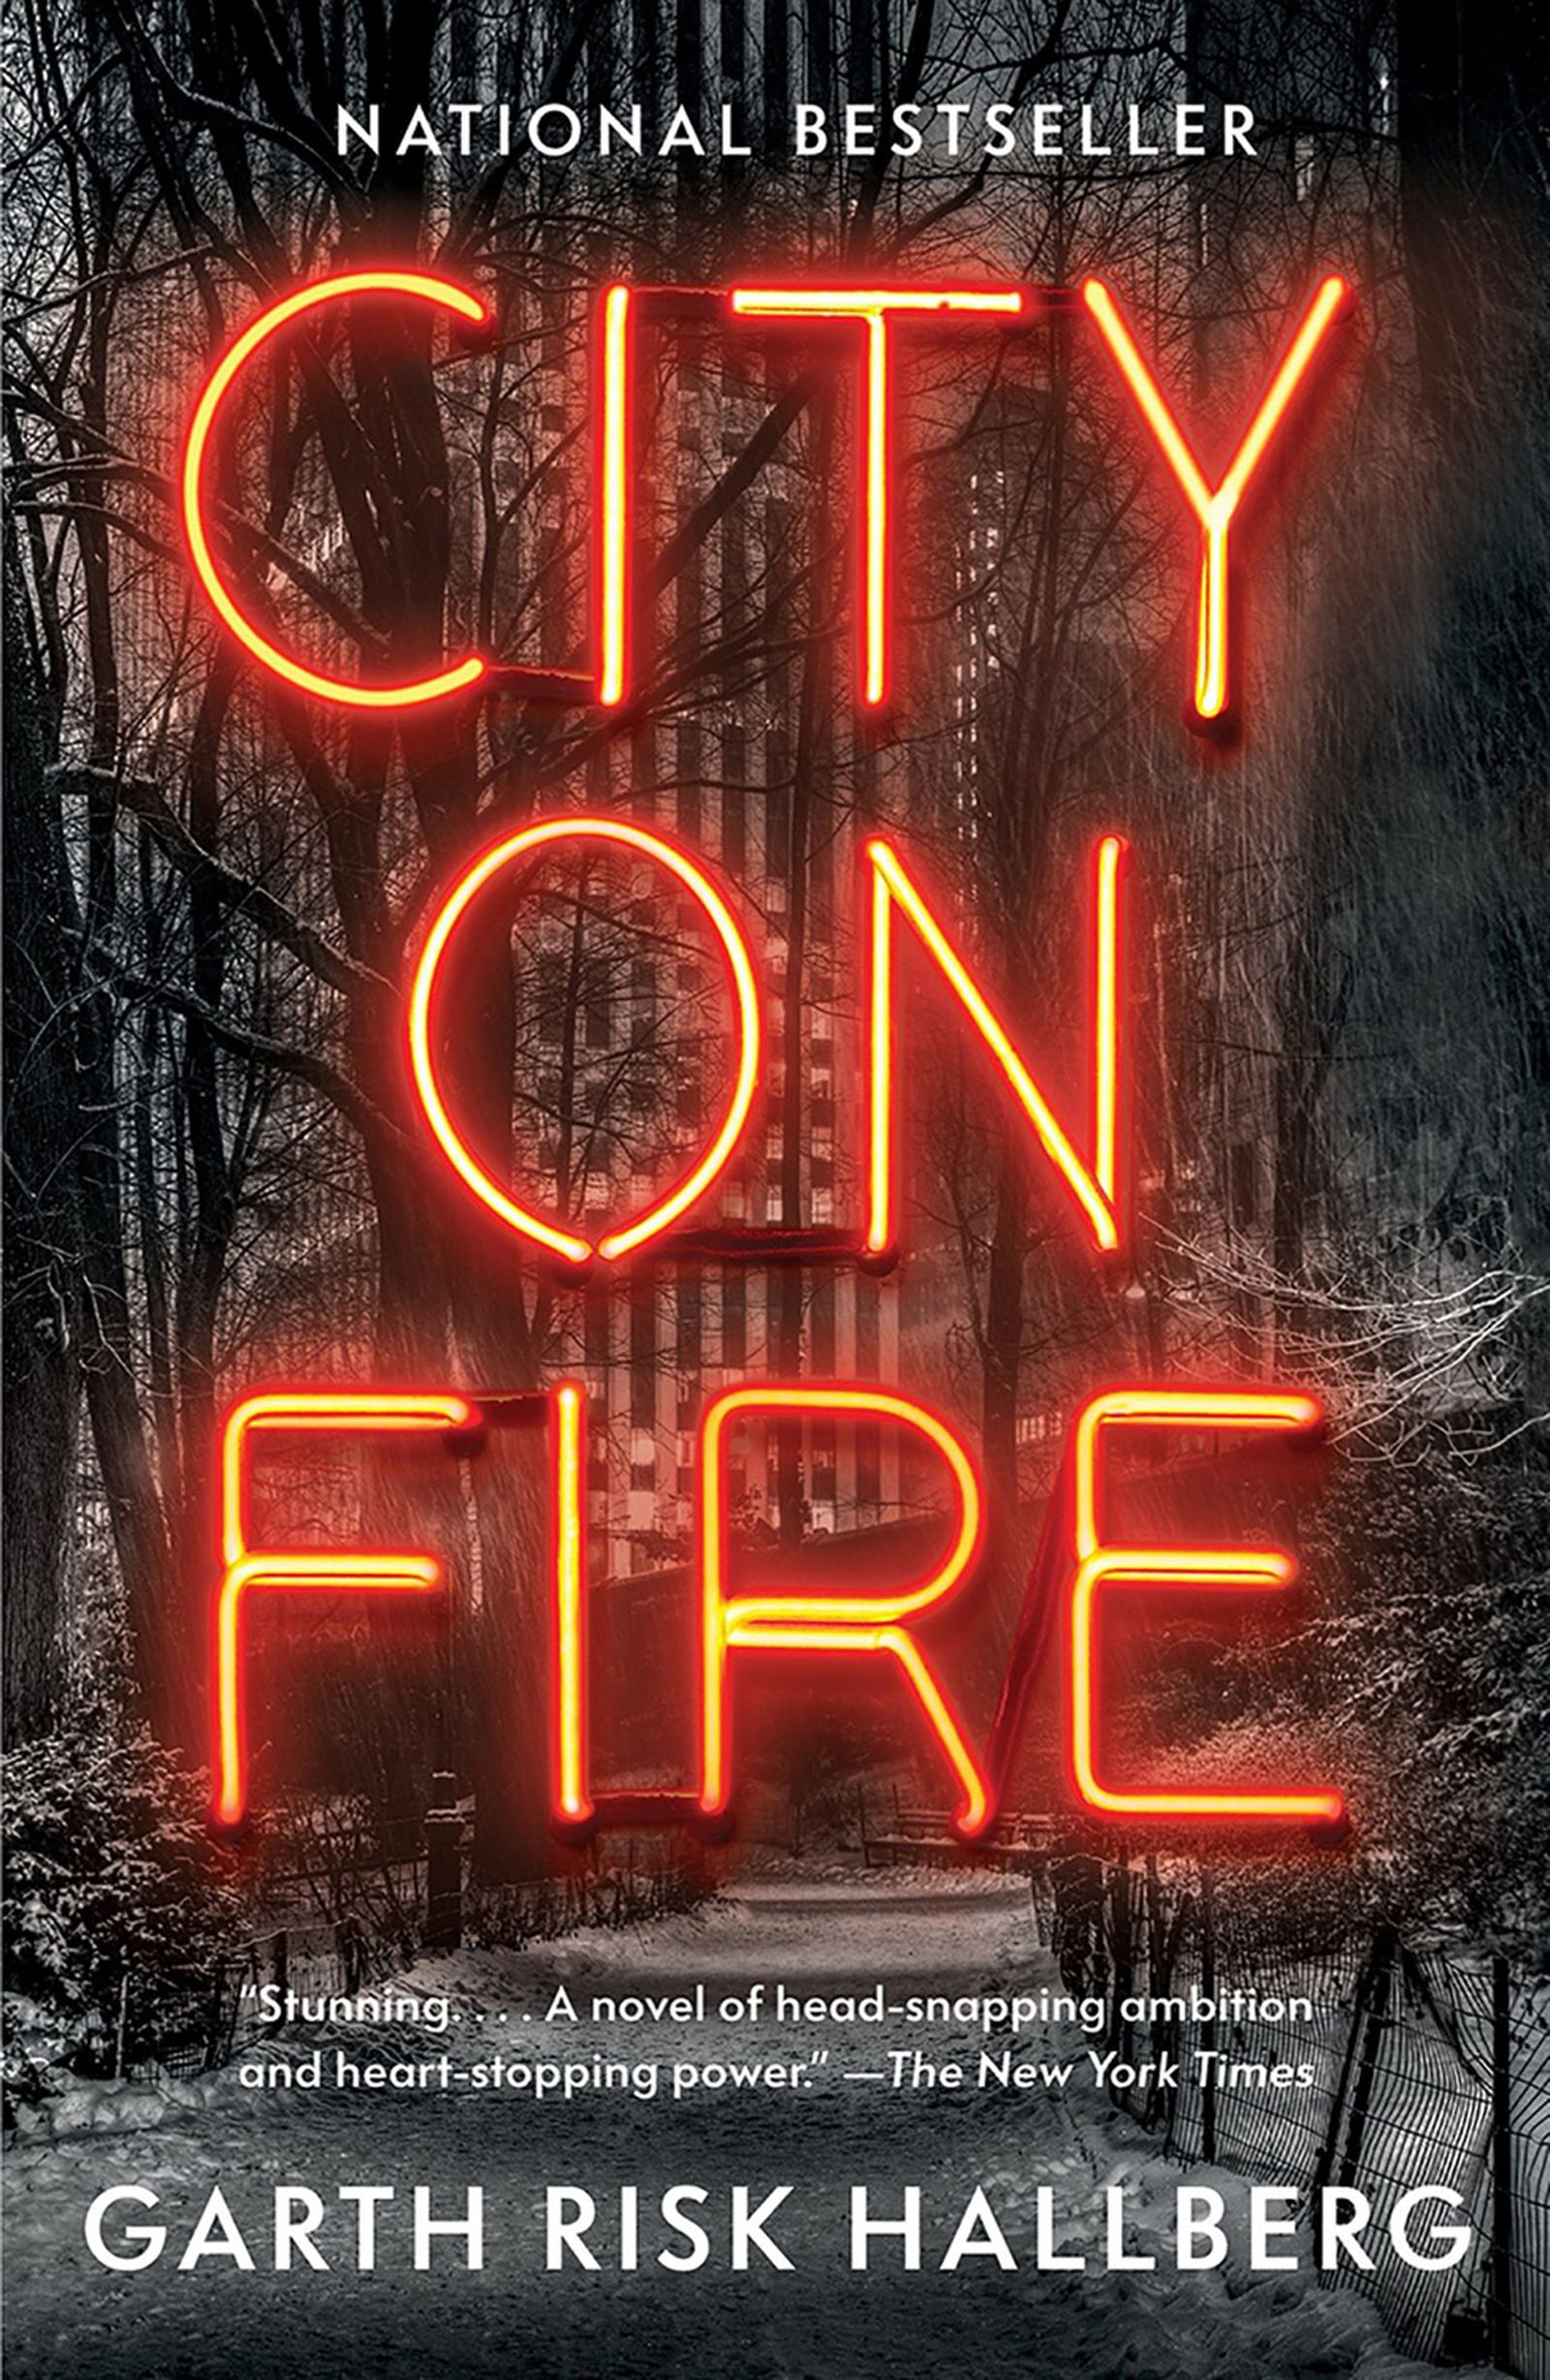 Apple Inks Deal for 'City on Fire' Adaptation